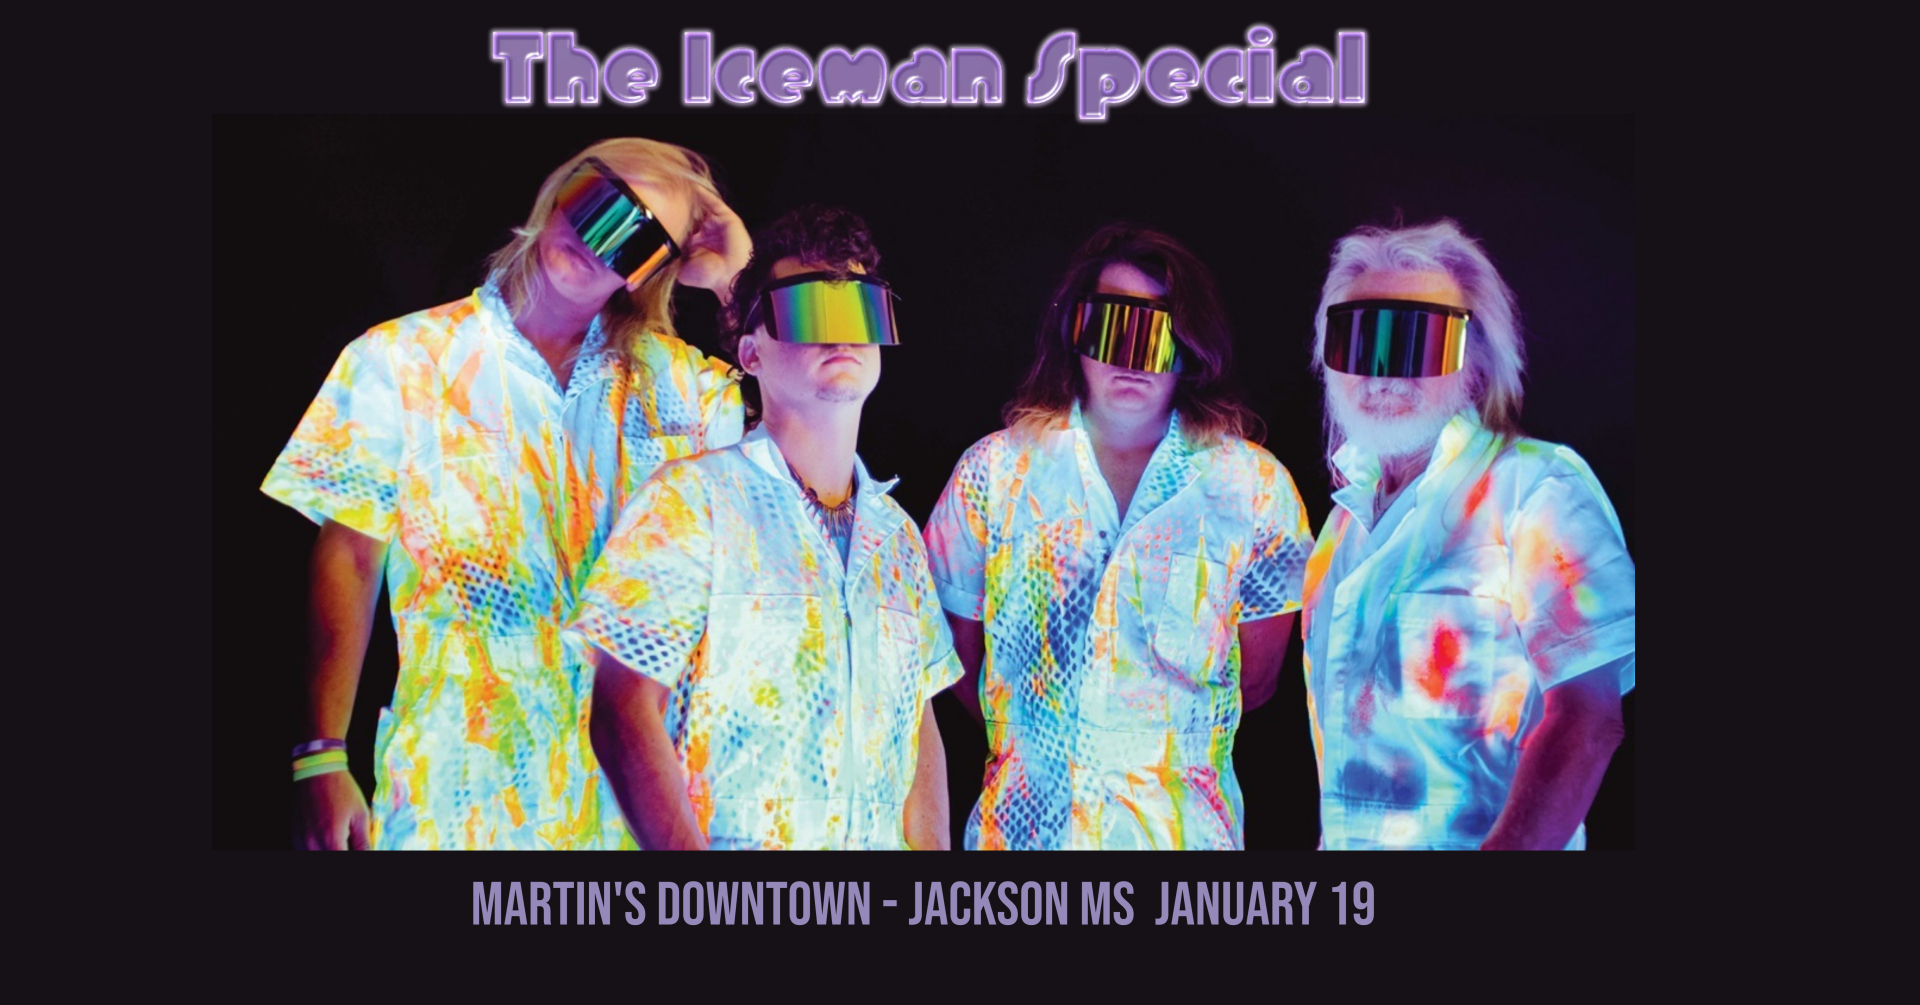 The Iceman Special Live at Martin’s Downtown